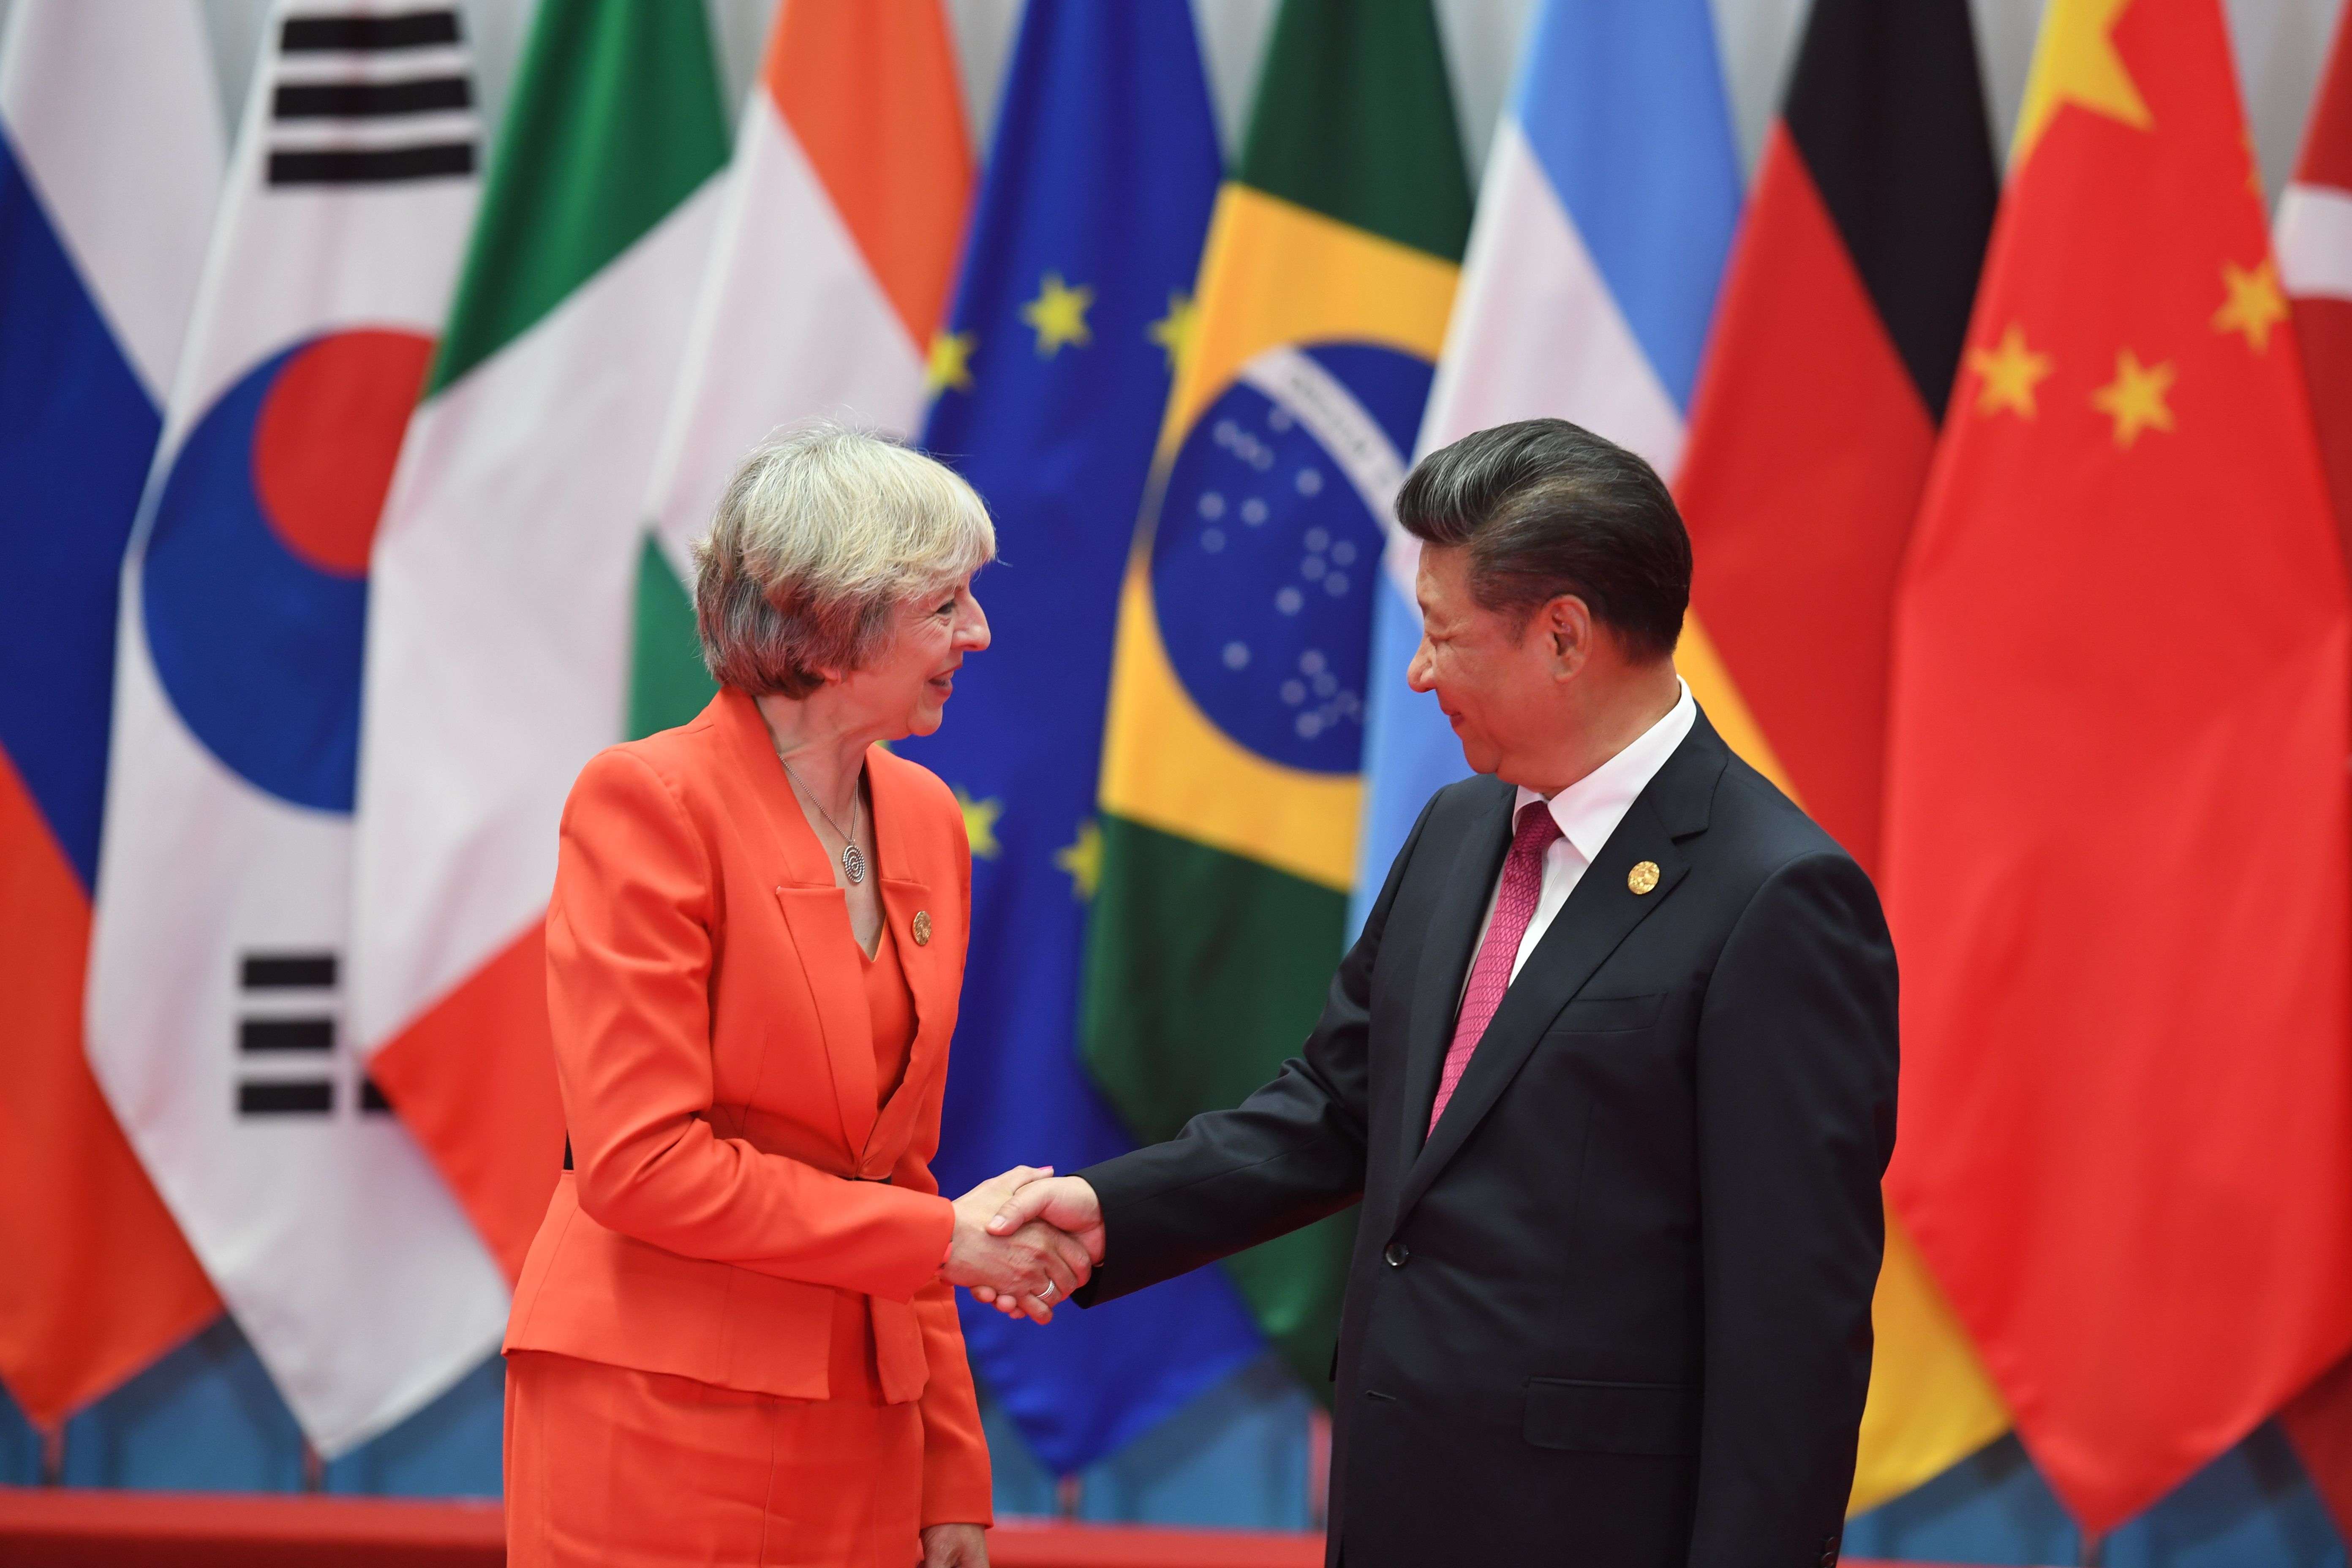 British Prime Minister Theresa May shakes hands with President Xi Jinping on Sunday. Photo: AFP